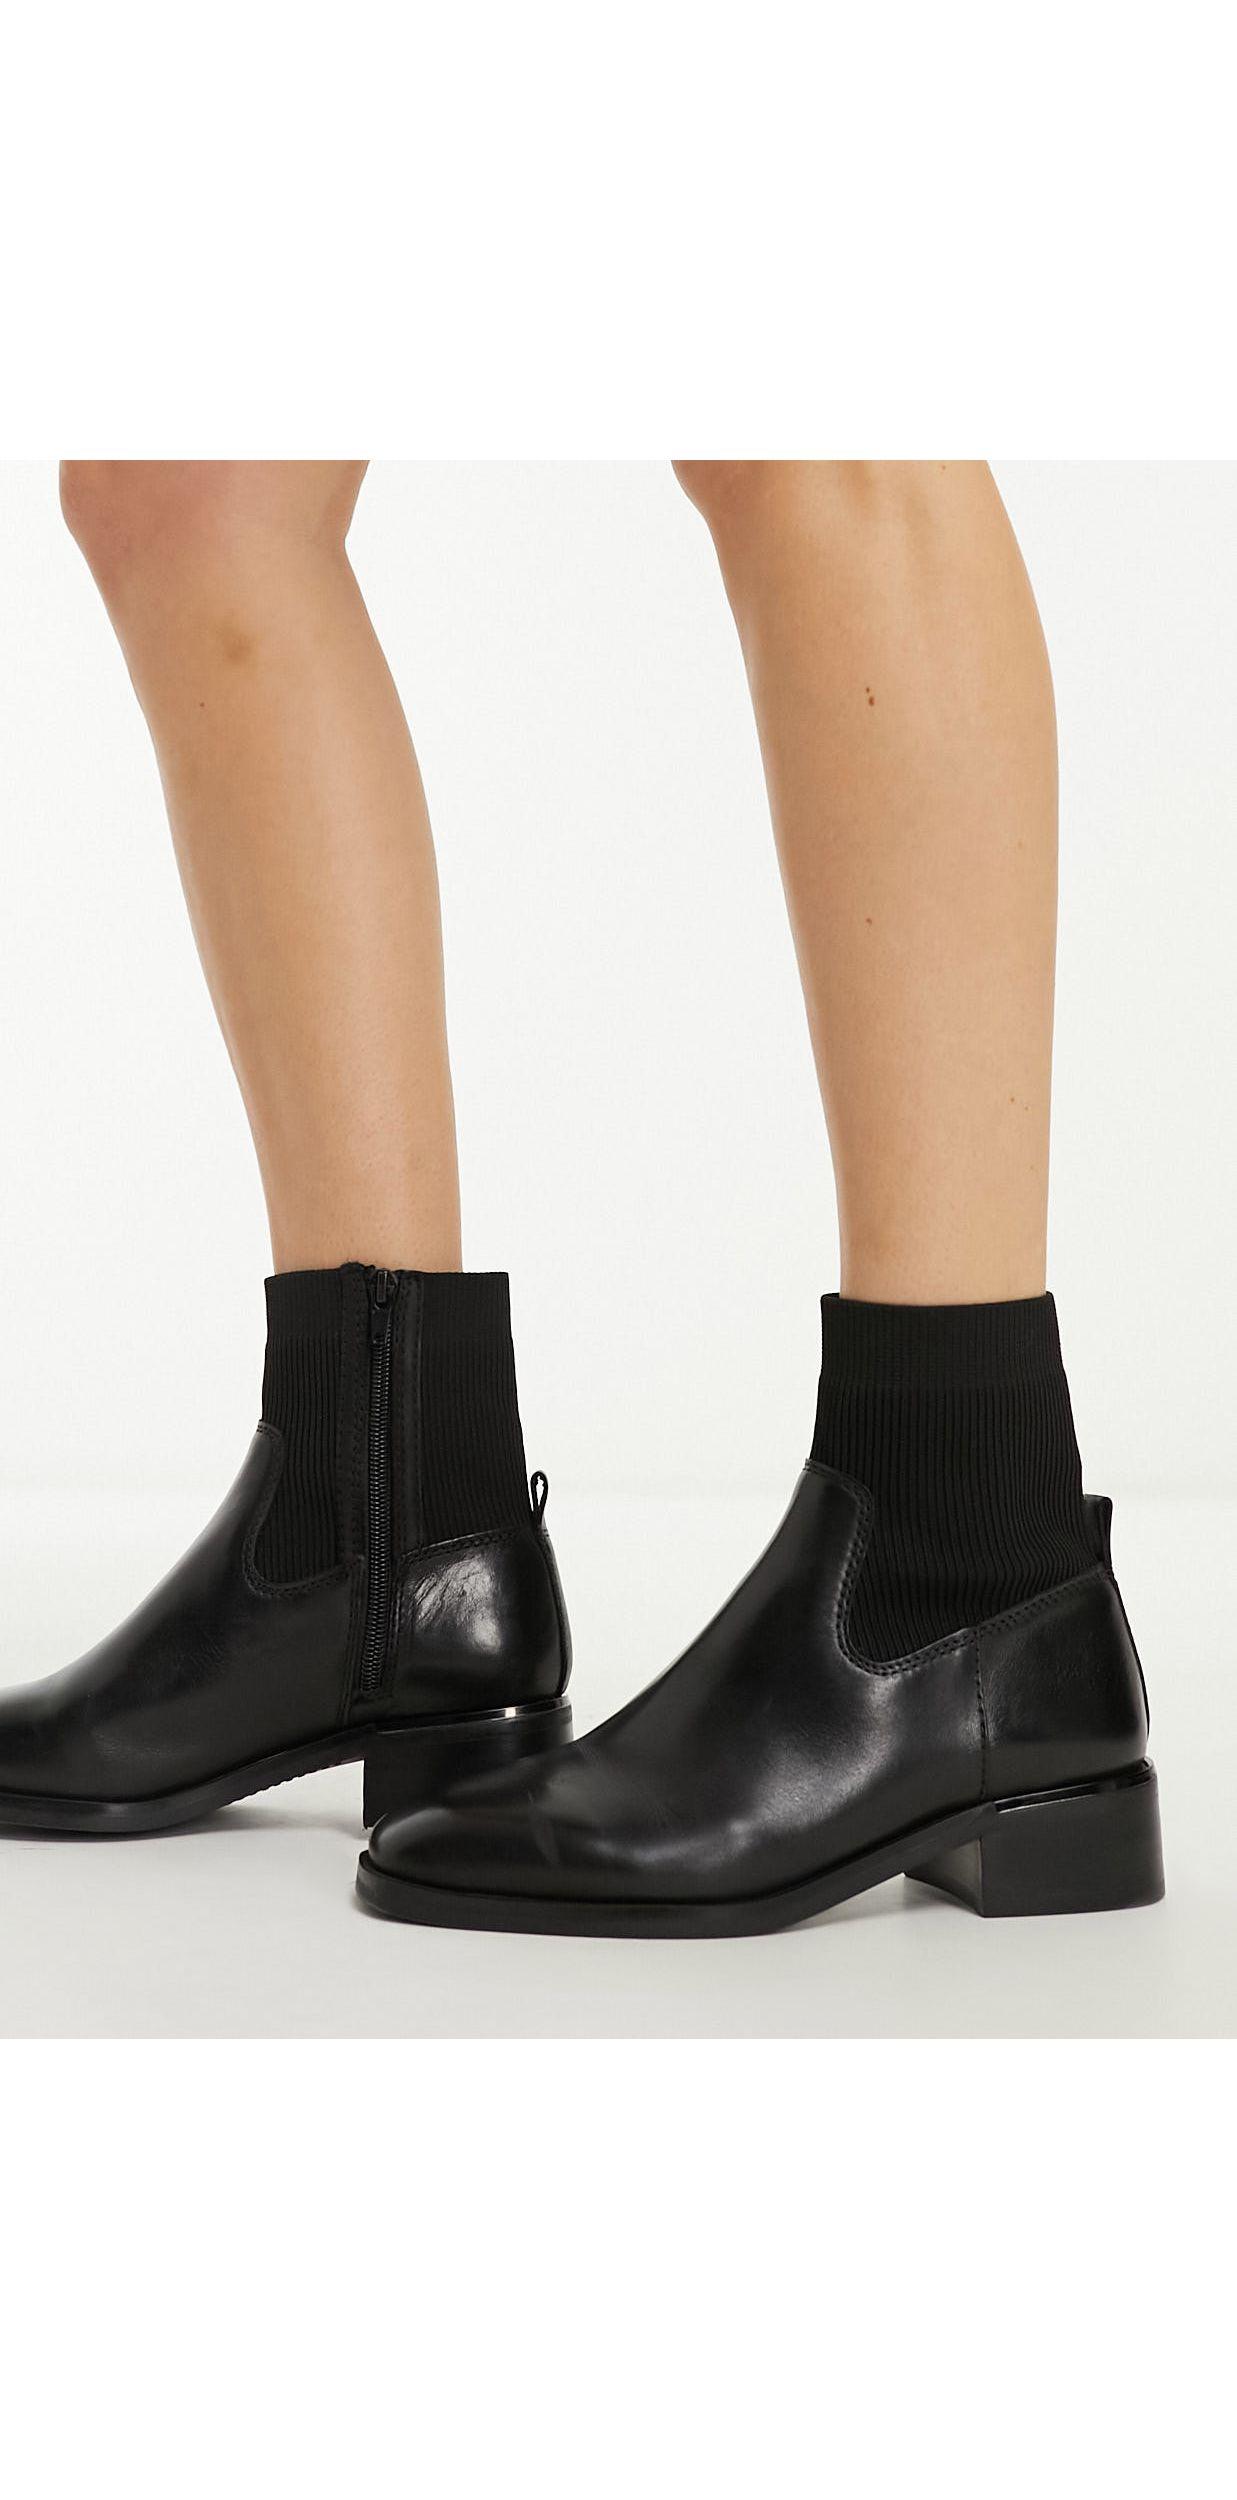 ALDO Kilcooly Knitted Ankle Boots in Black | Lyst Canada